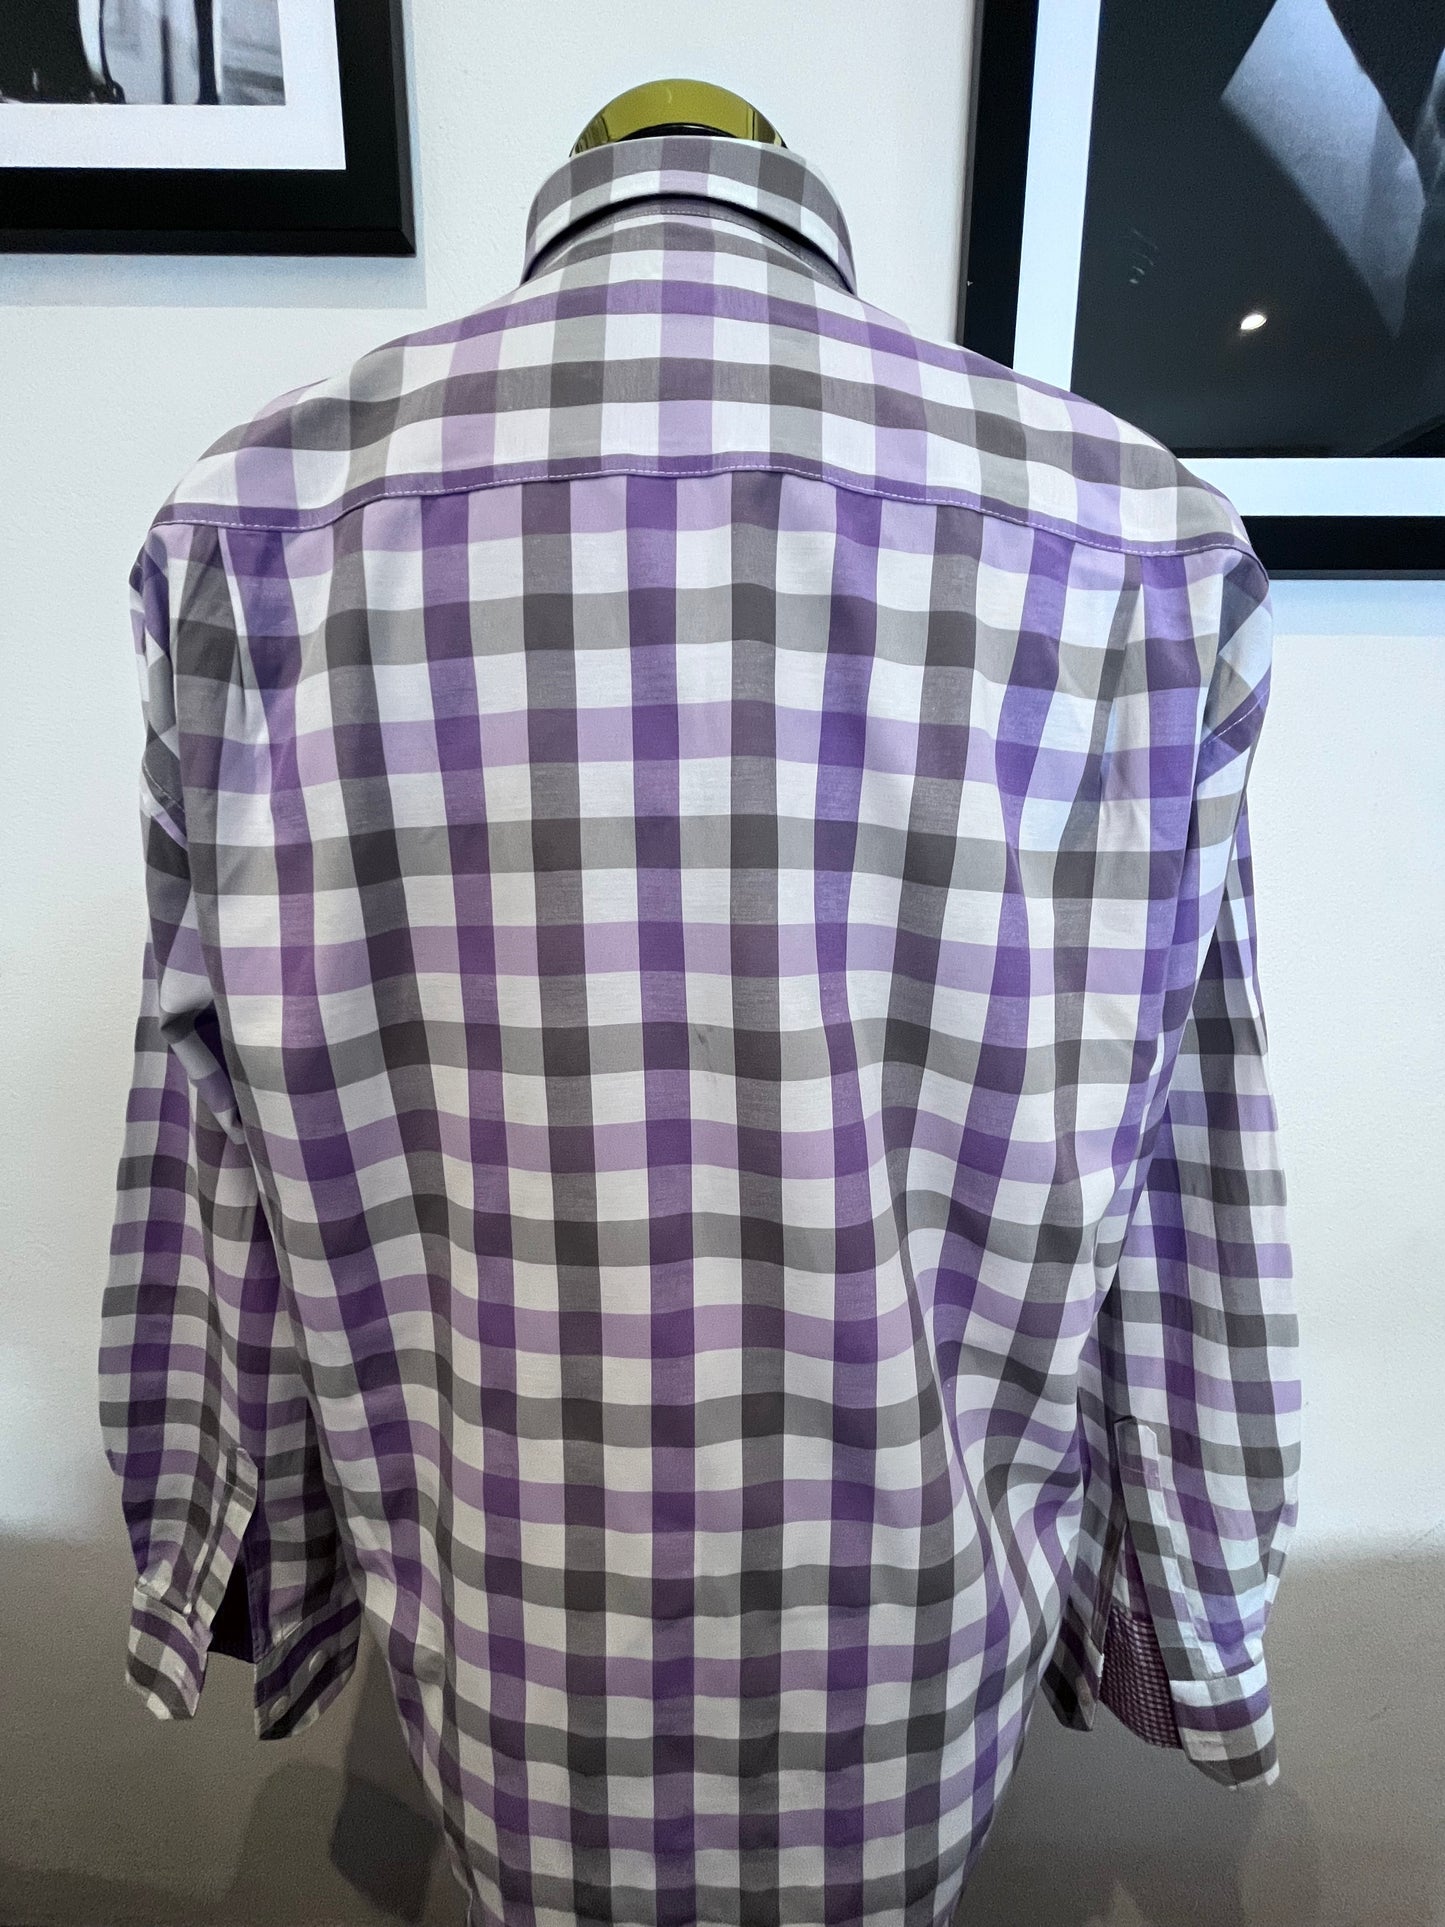 Paul & Shark 100% Cotton Purple White Check Shirt Size Large Made in Italy